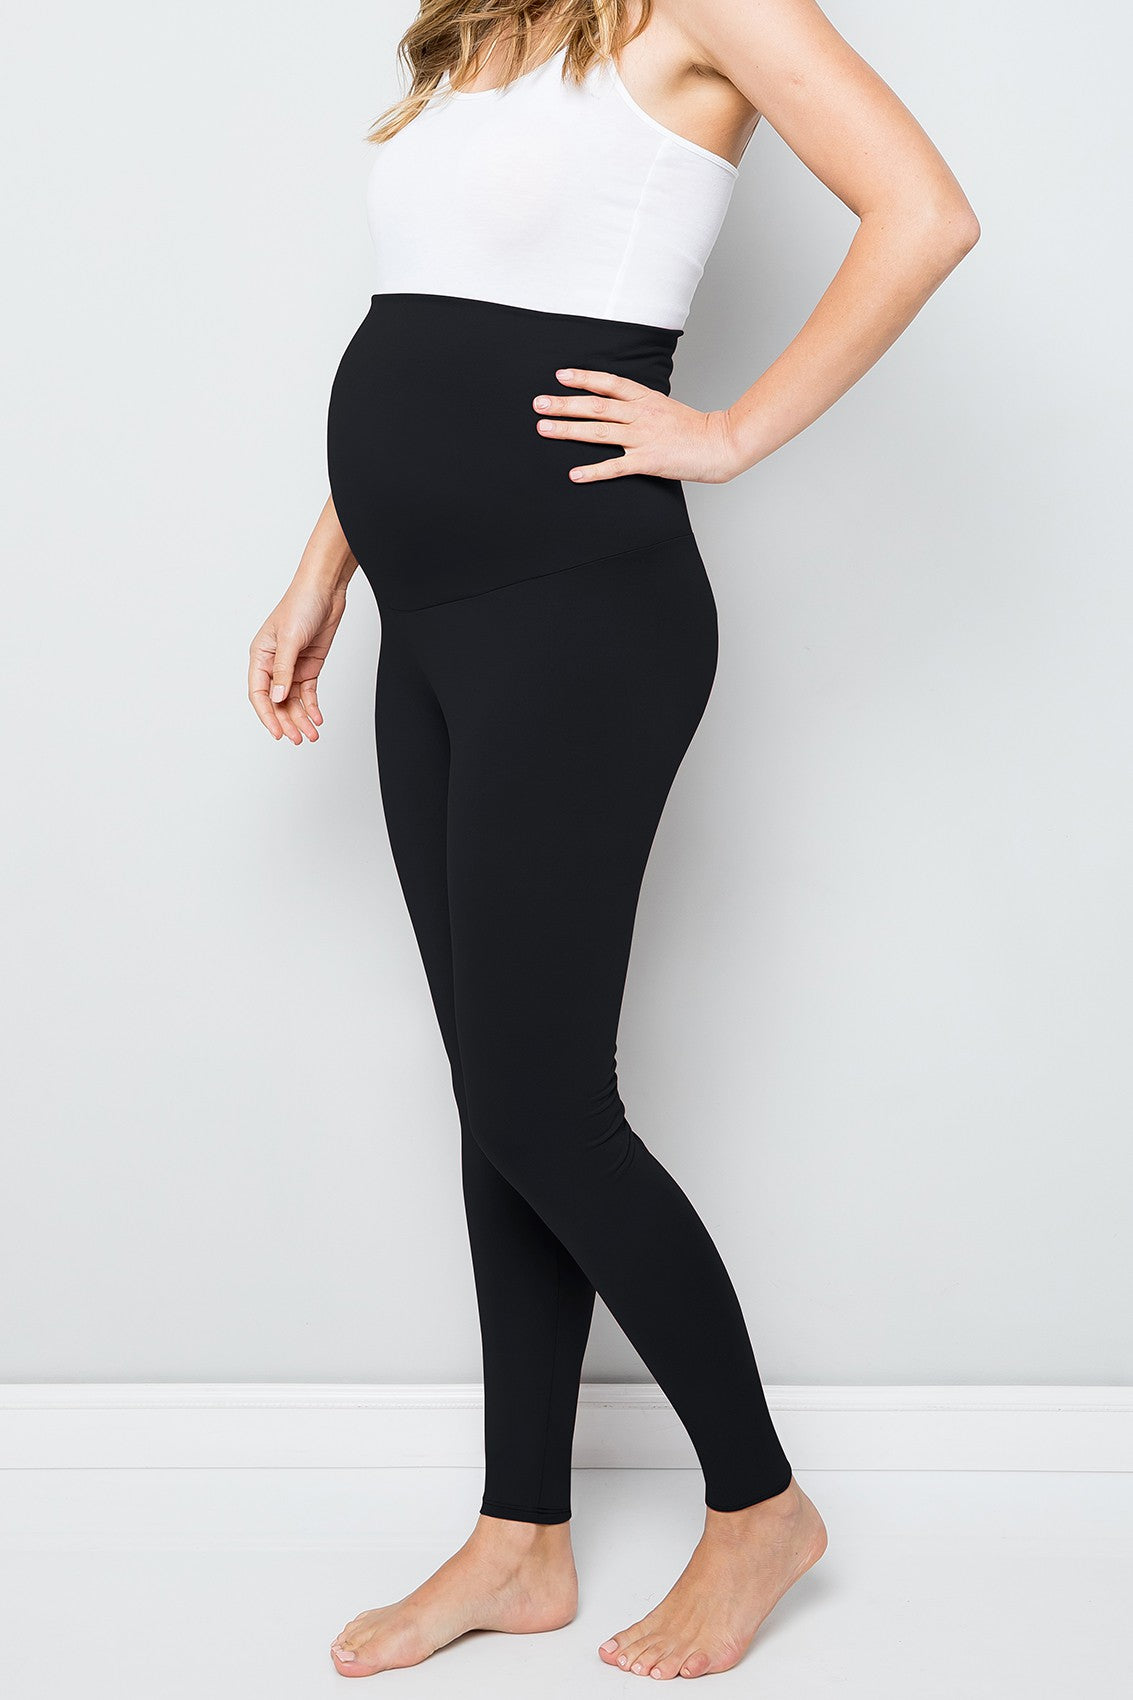 Soft & Thick Maternity Leggings For Pregnancy With Ankle Zip For Work